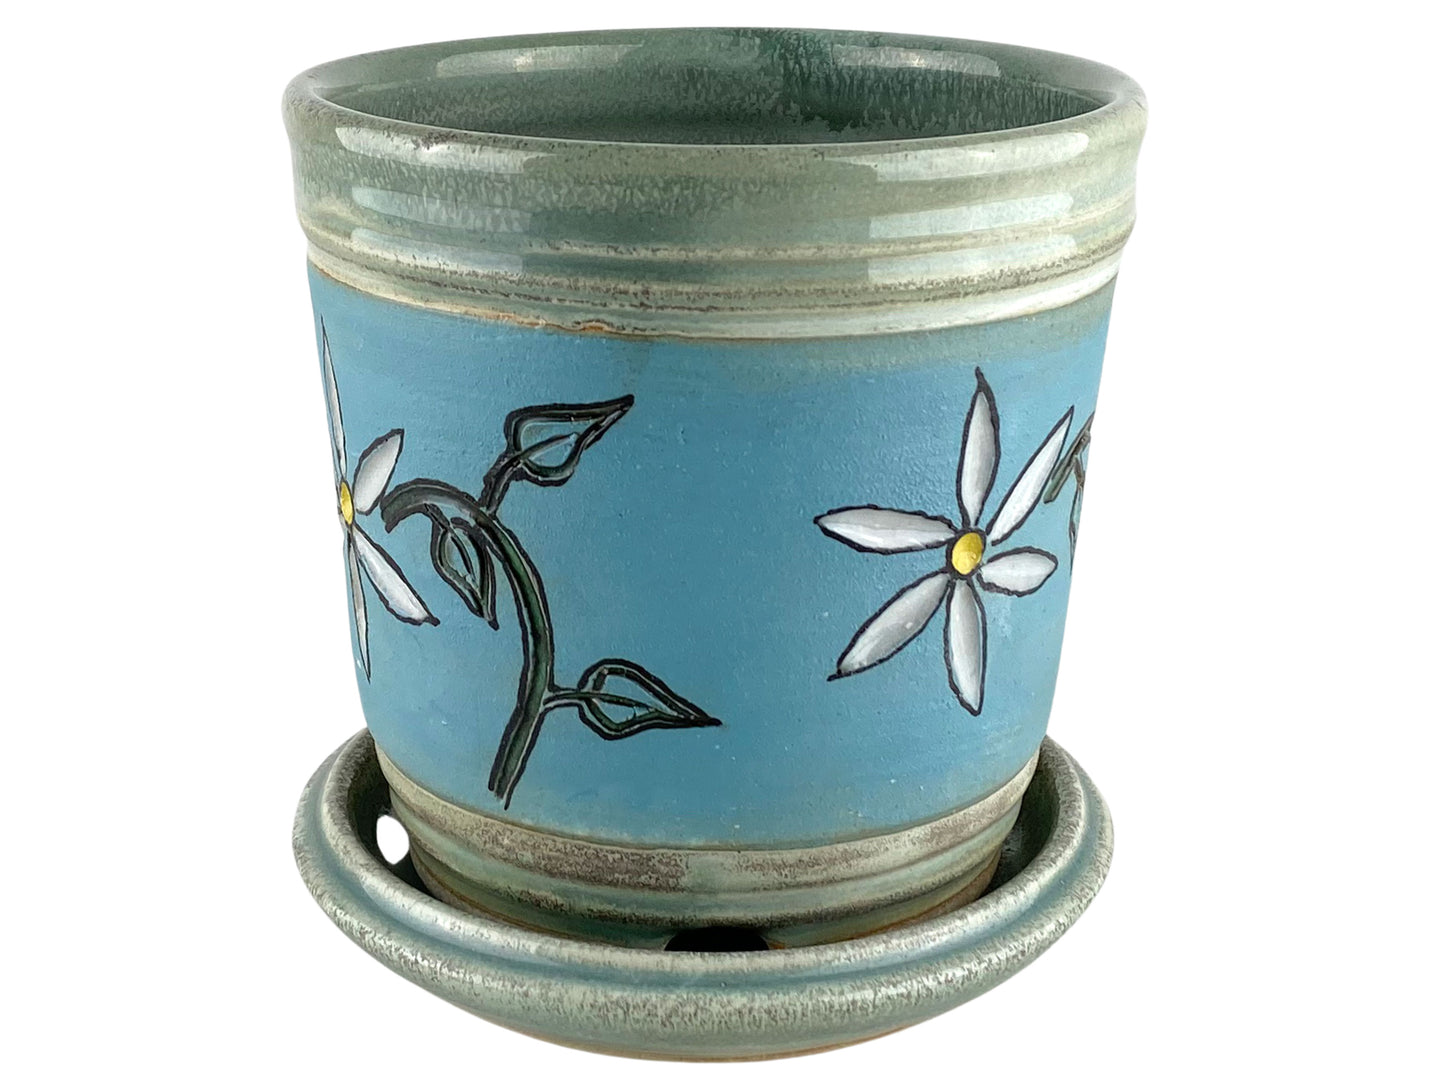 Stoneware Planter with Carved Flower Design